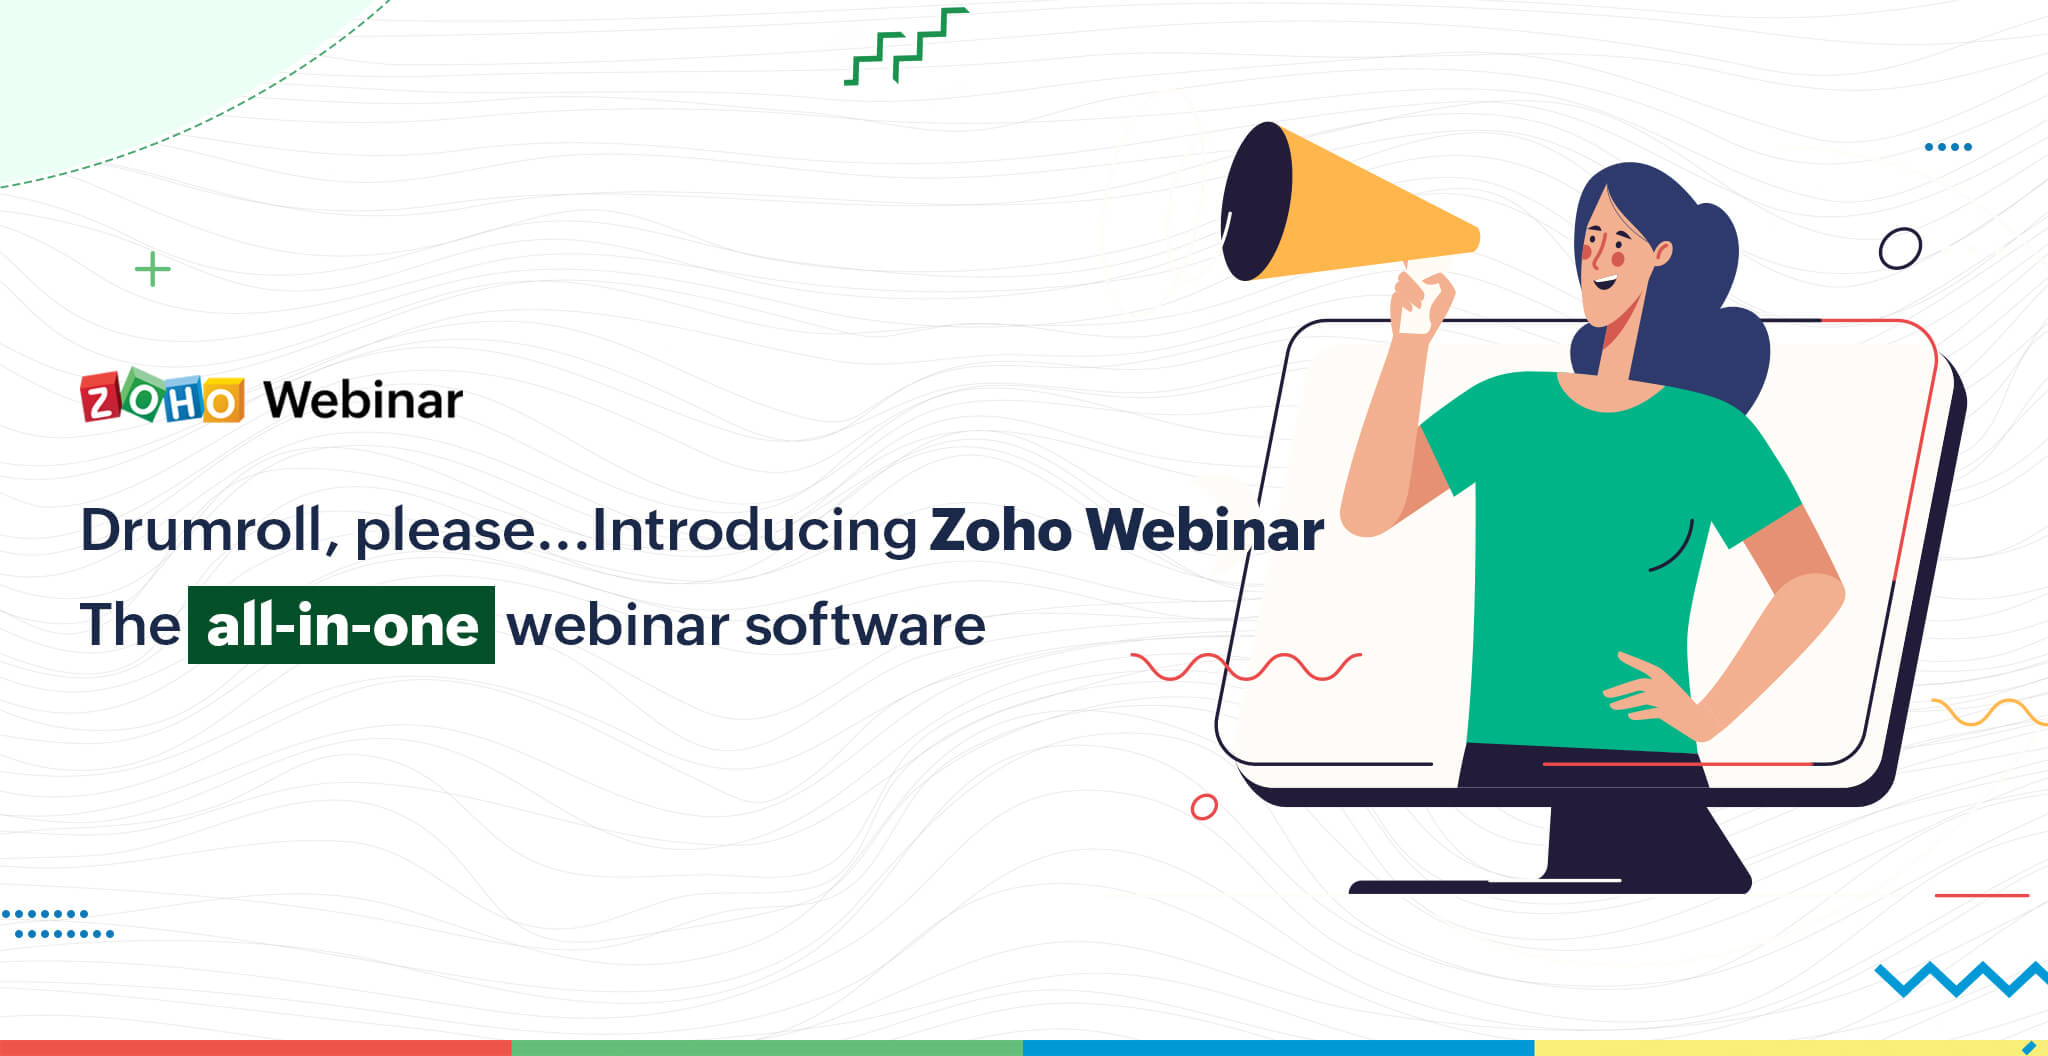 Announcing Zoho's all-in-one virtual event platform: Zoho Webinar, a comprehensive webinar tool for all of your online webinar needs.